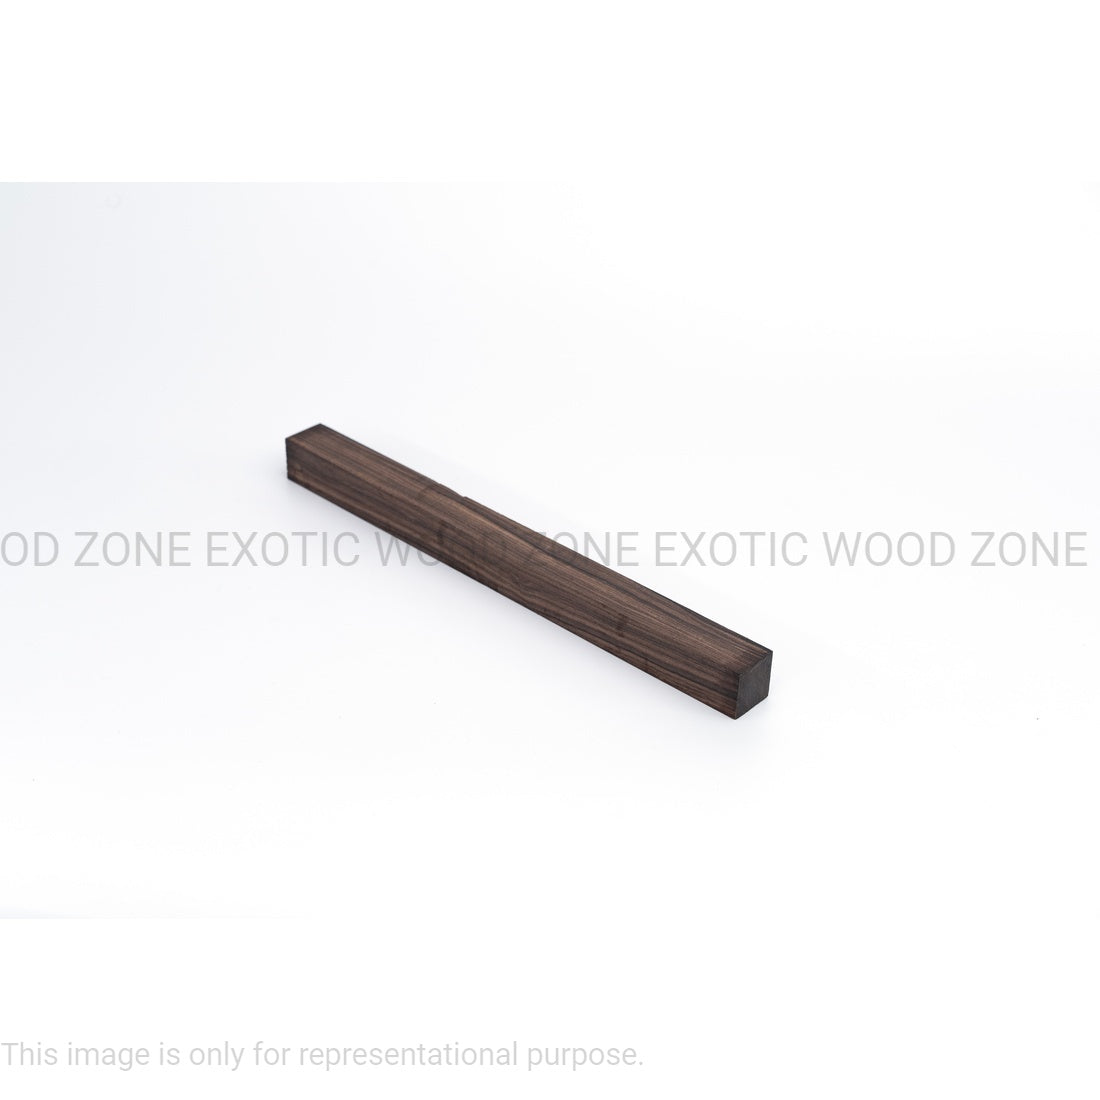 Santos Rosewood Hobbywood Blank 1&quot; x 1 &quot; x 12&quot; inches Exotic Wood Zone